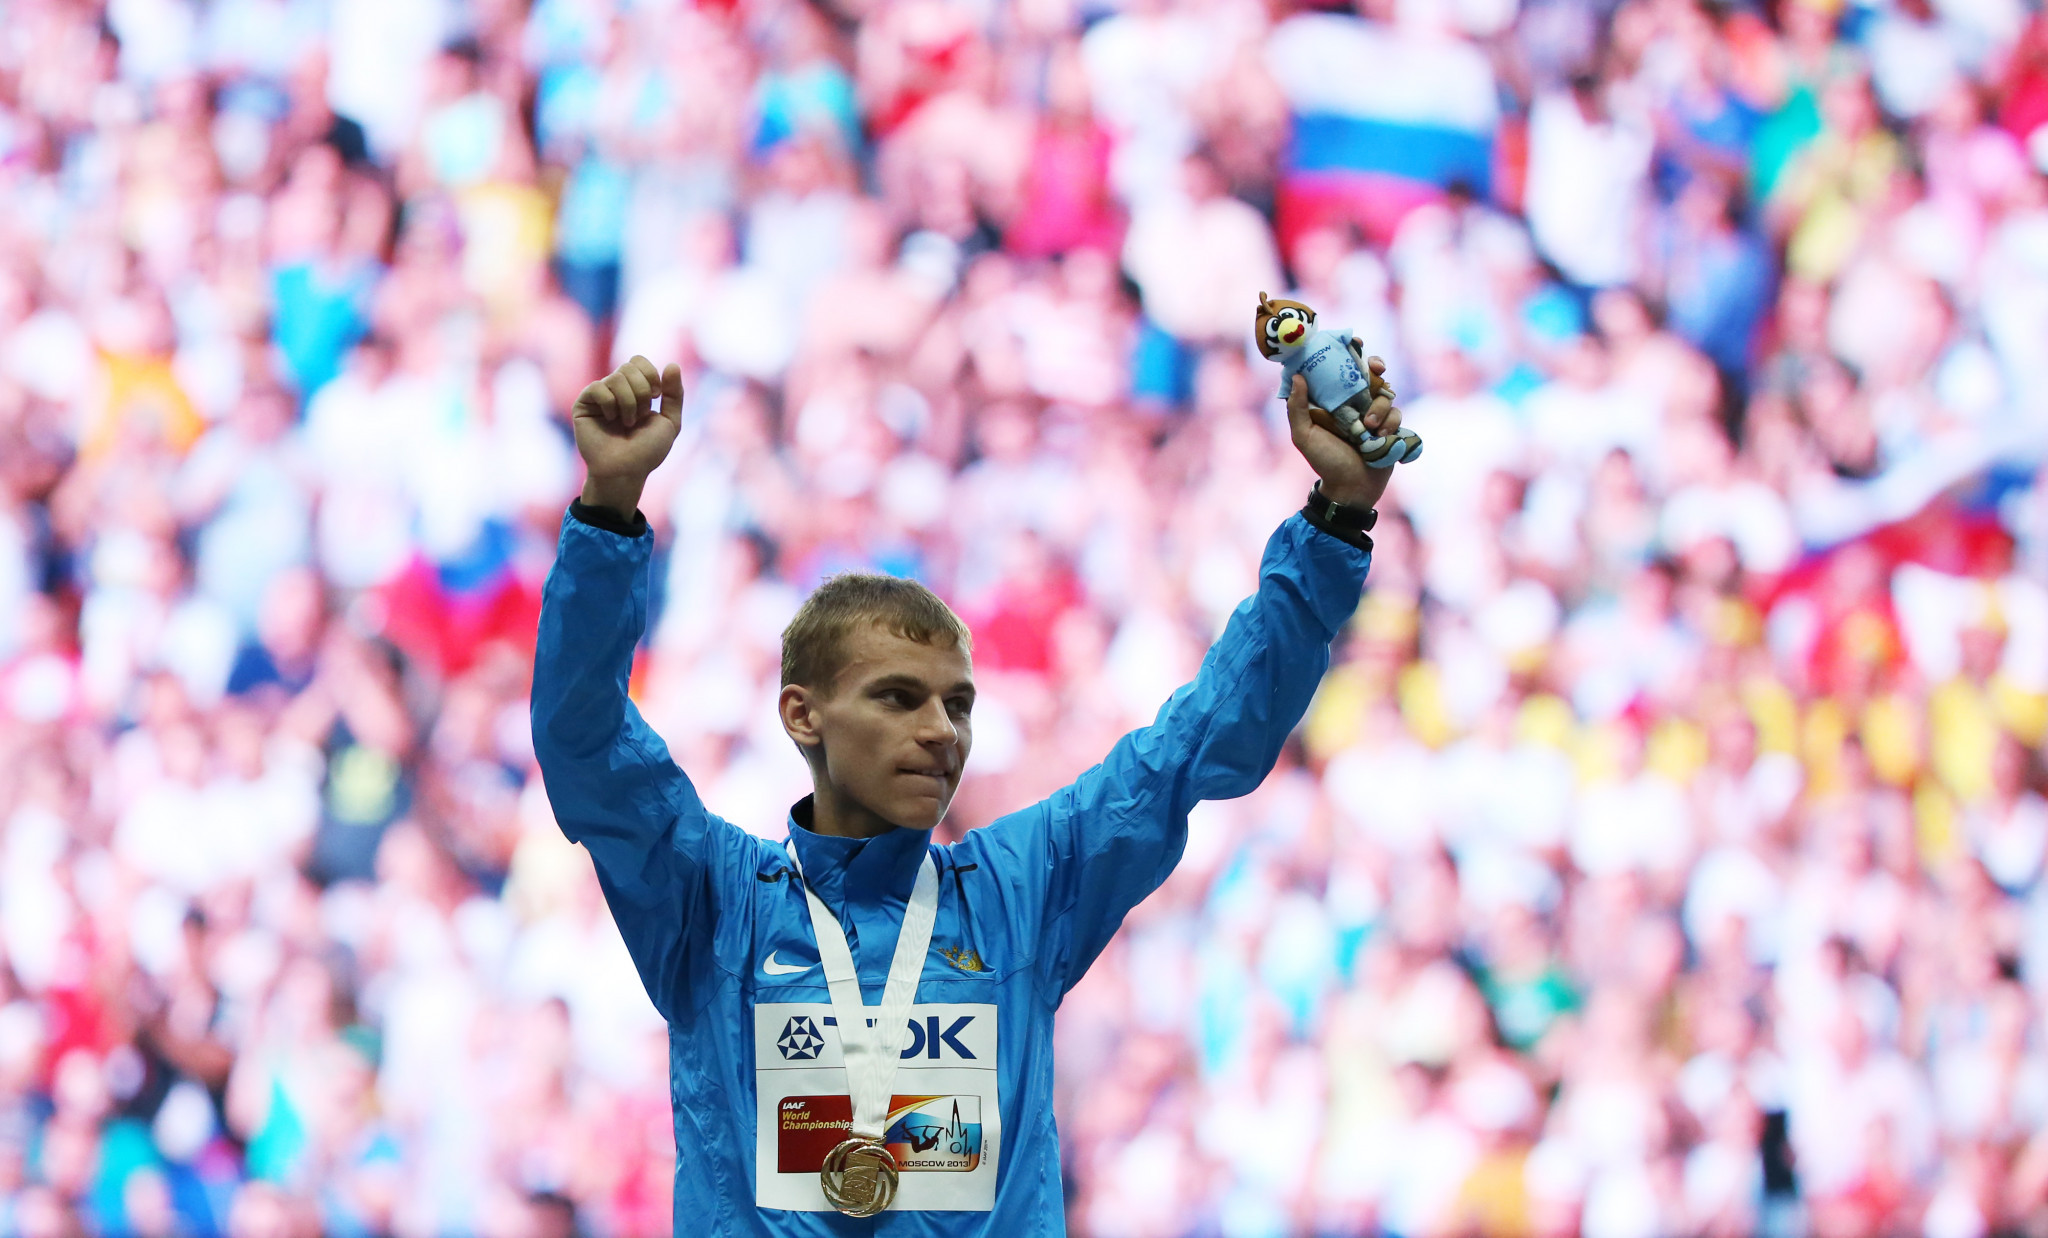 Alexandr Ivanov will lose the gold medal he won at the 2013 IAAF World Championships ©Getty Images